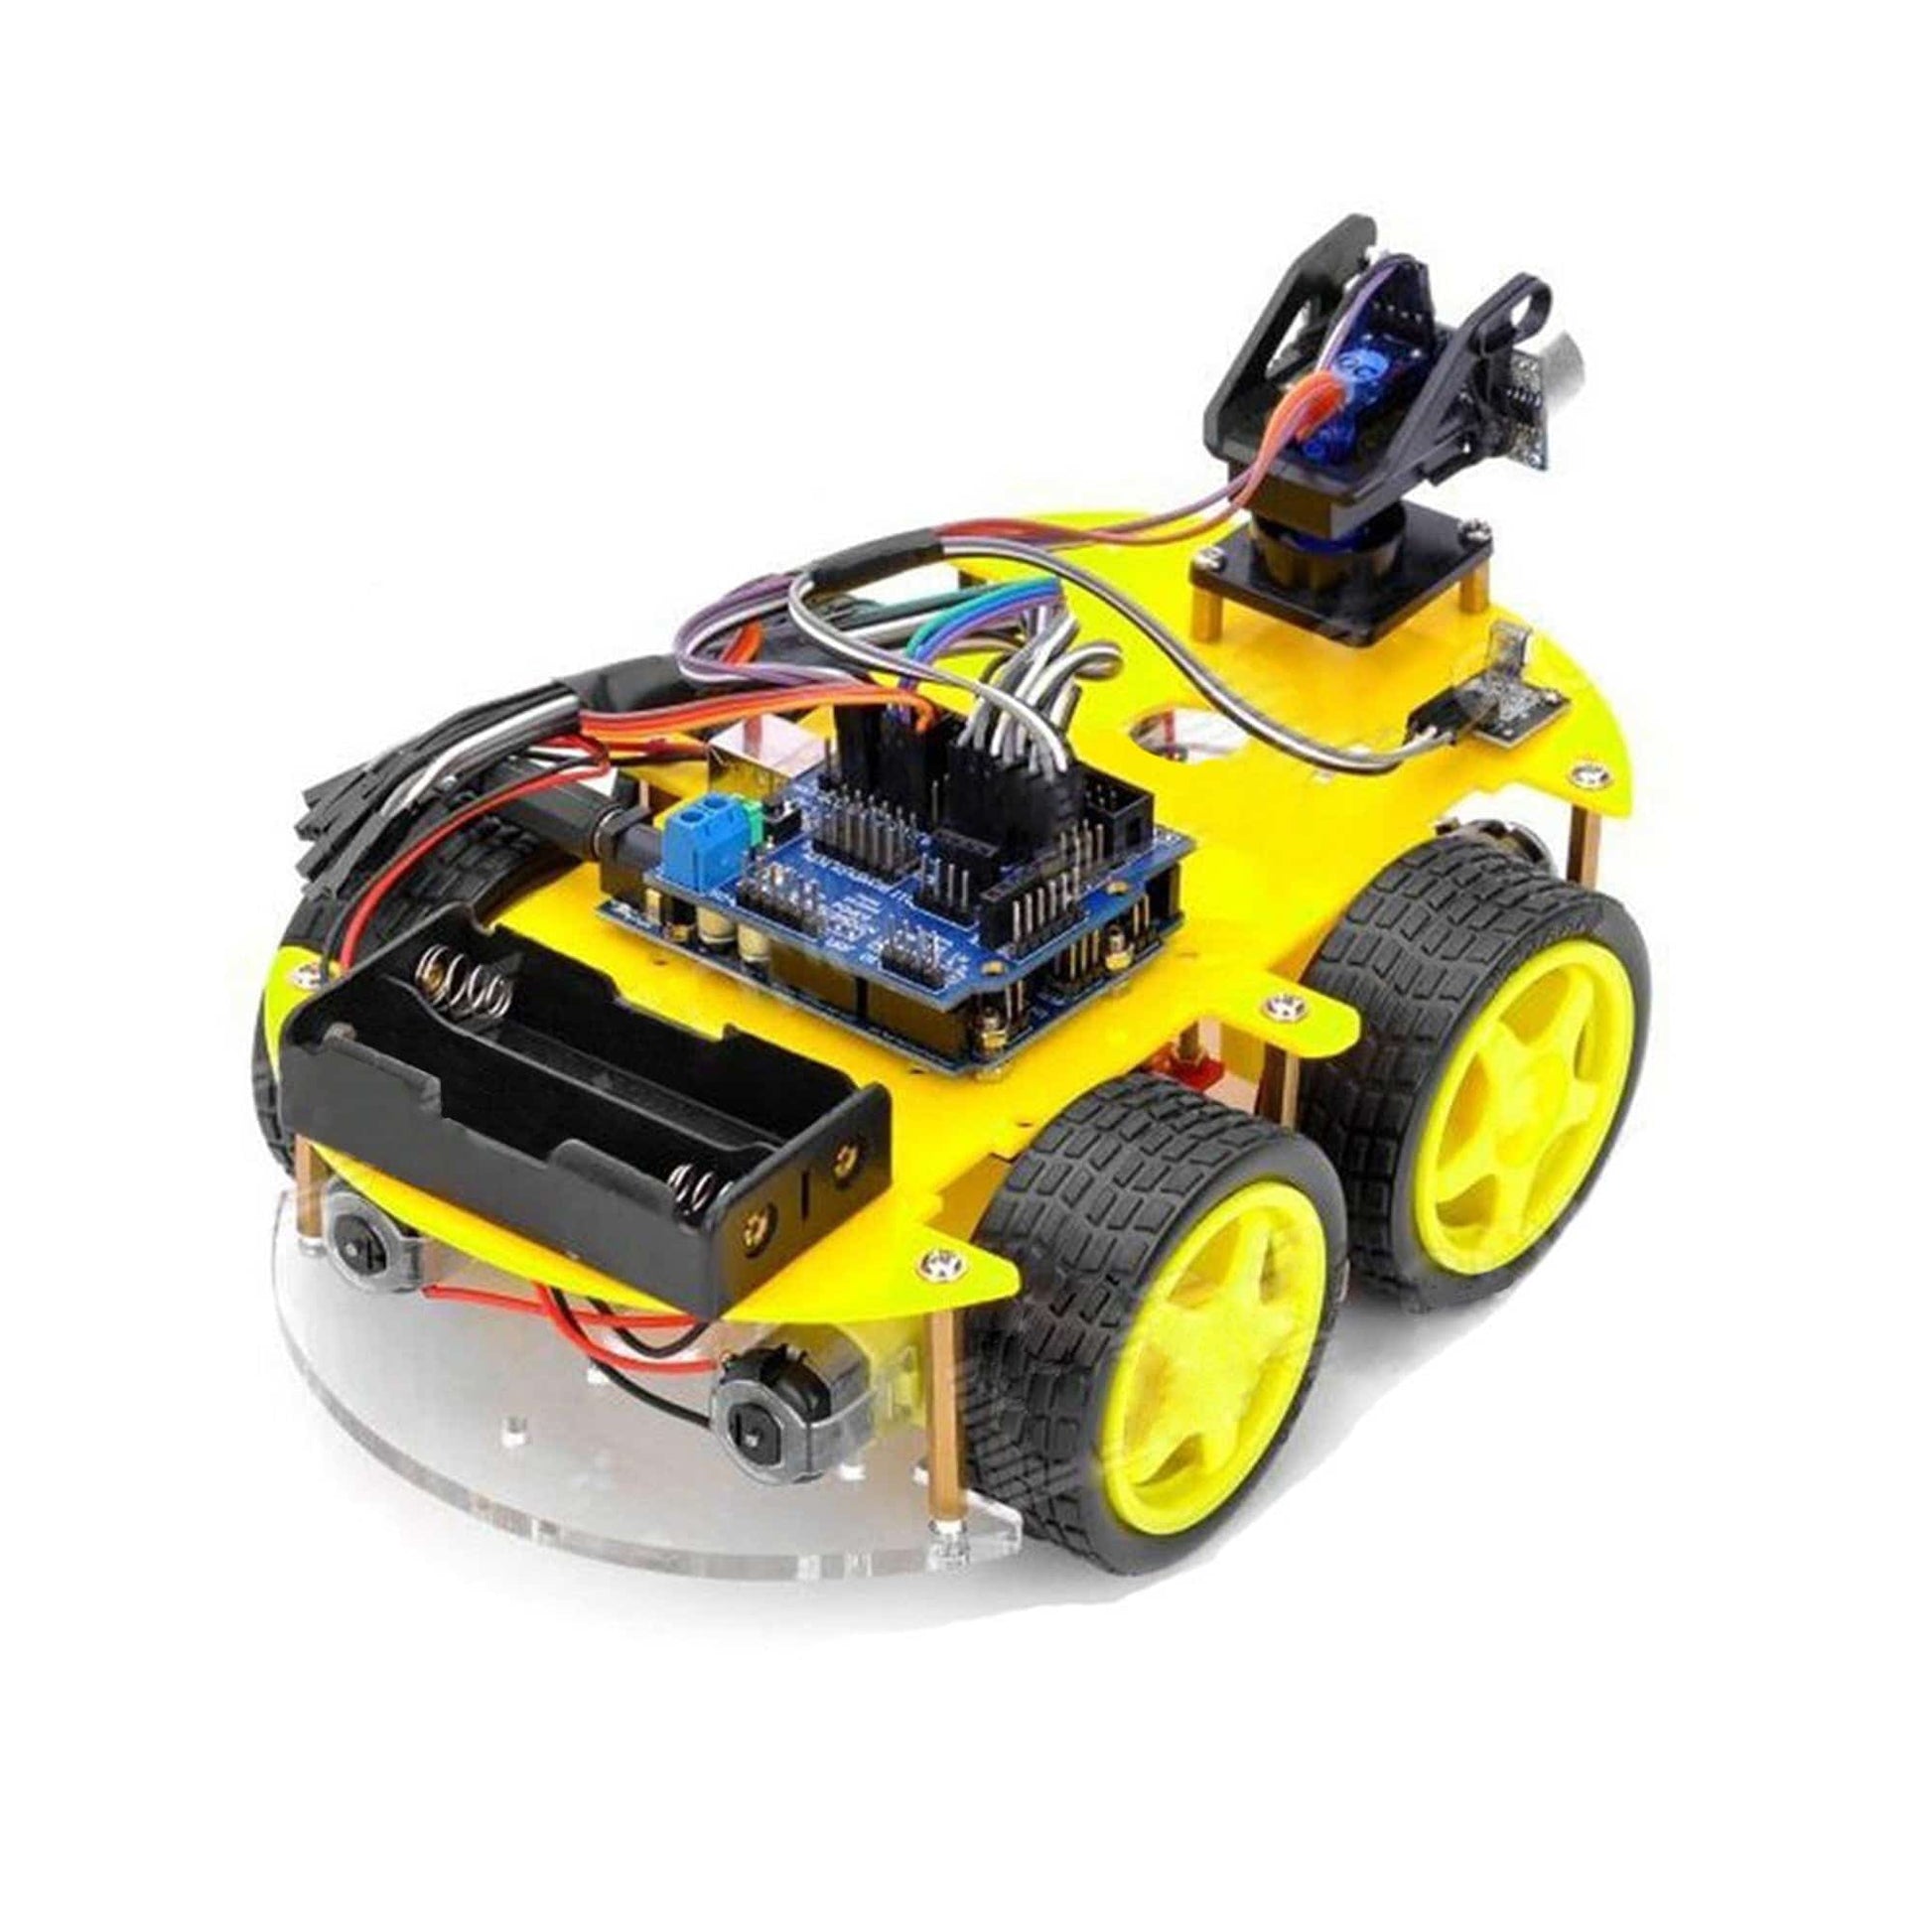 Multi-function 4WD Robot Car Kit Compatible with Arduino